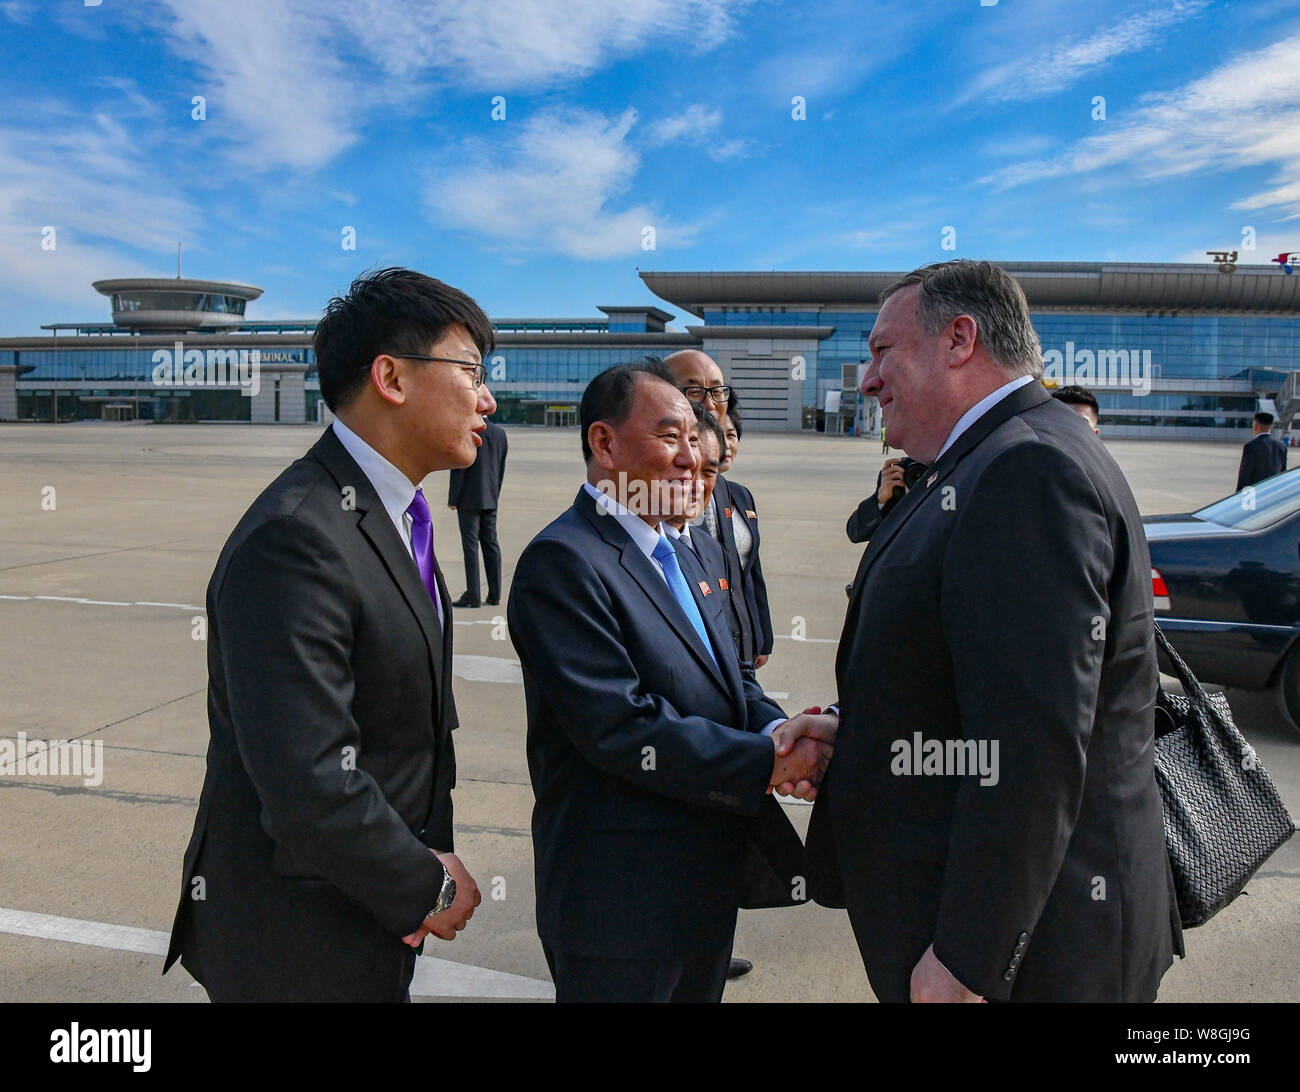 U.S. Secretary of State Michael R. Pompeo is greeted by North Korea's Vice Chairman Kim Yong Chol upon arrival to Pyongyang, North Korea on October 7, Stock Photo